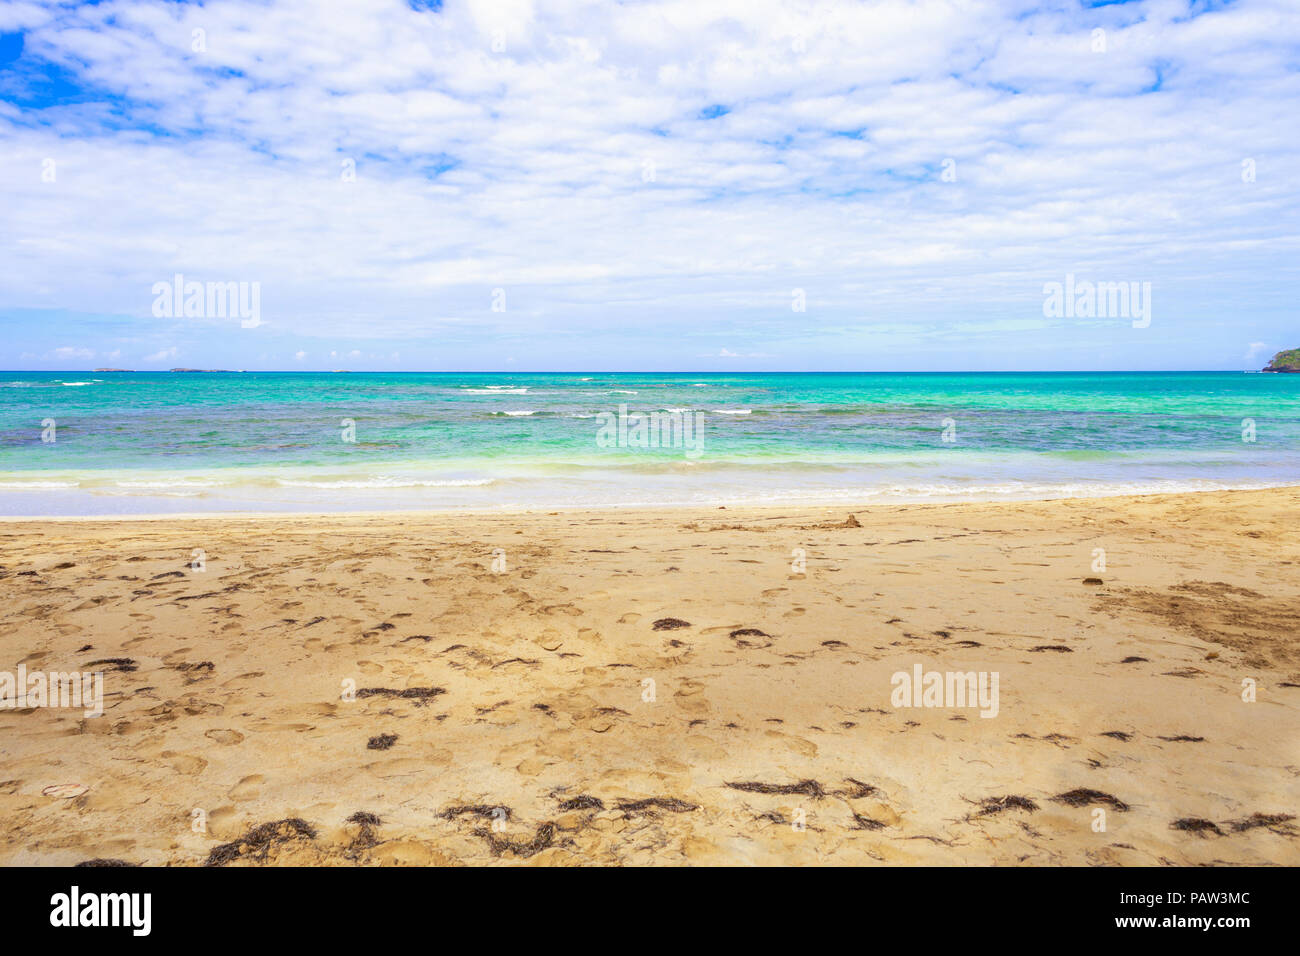 Empty sandy beach with azure blue color of the caribbean sea. Dominican Republic Stock Photo